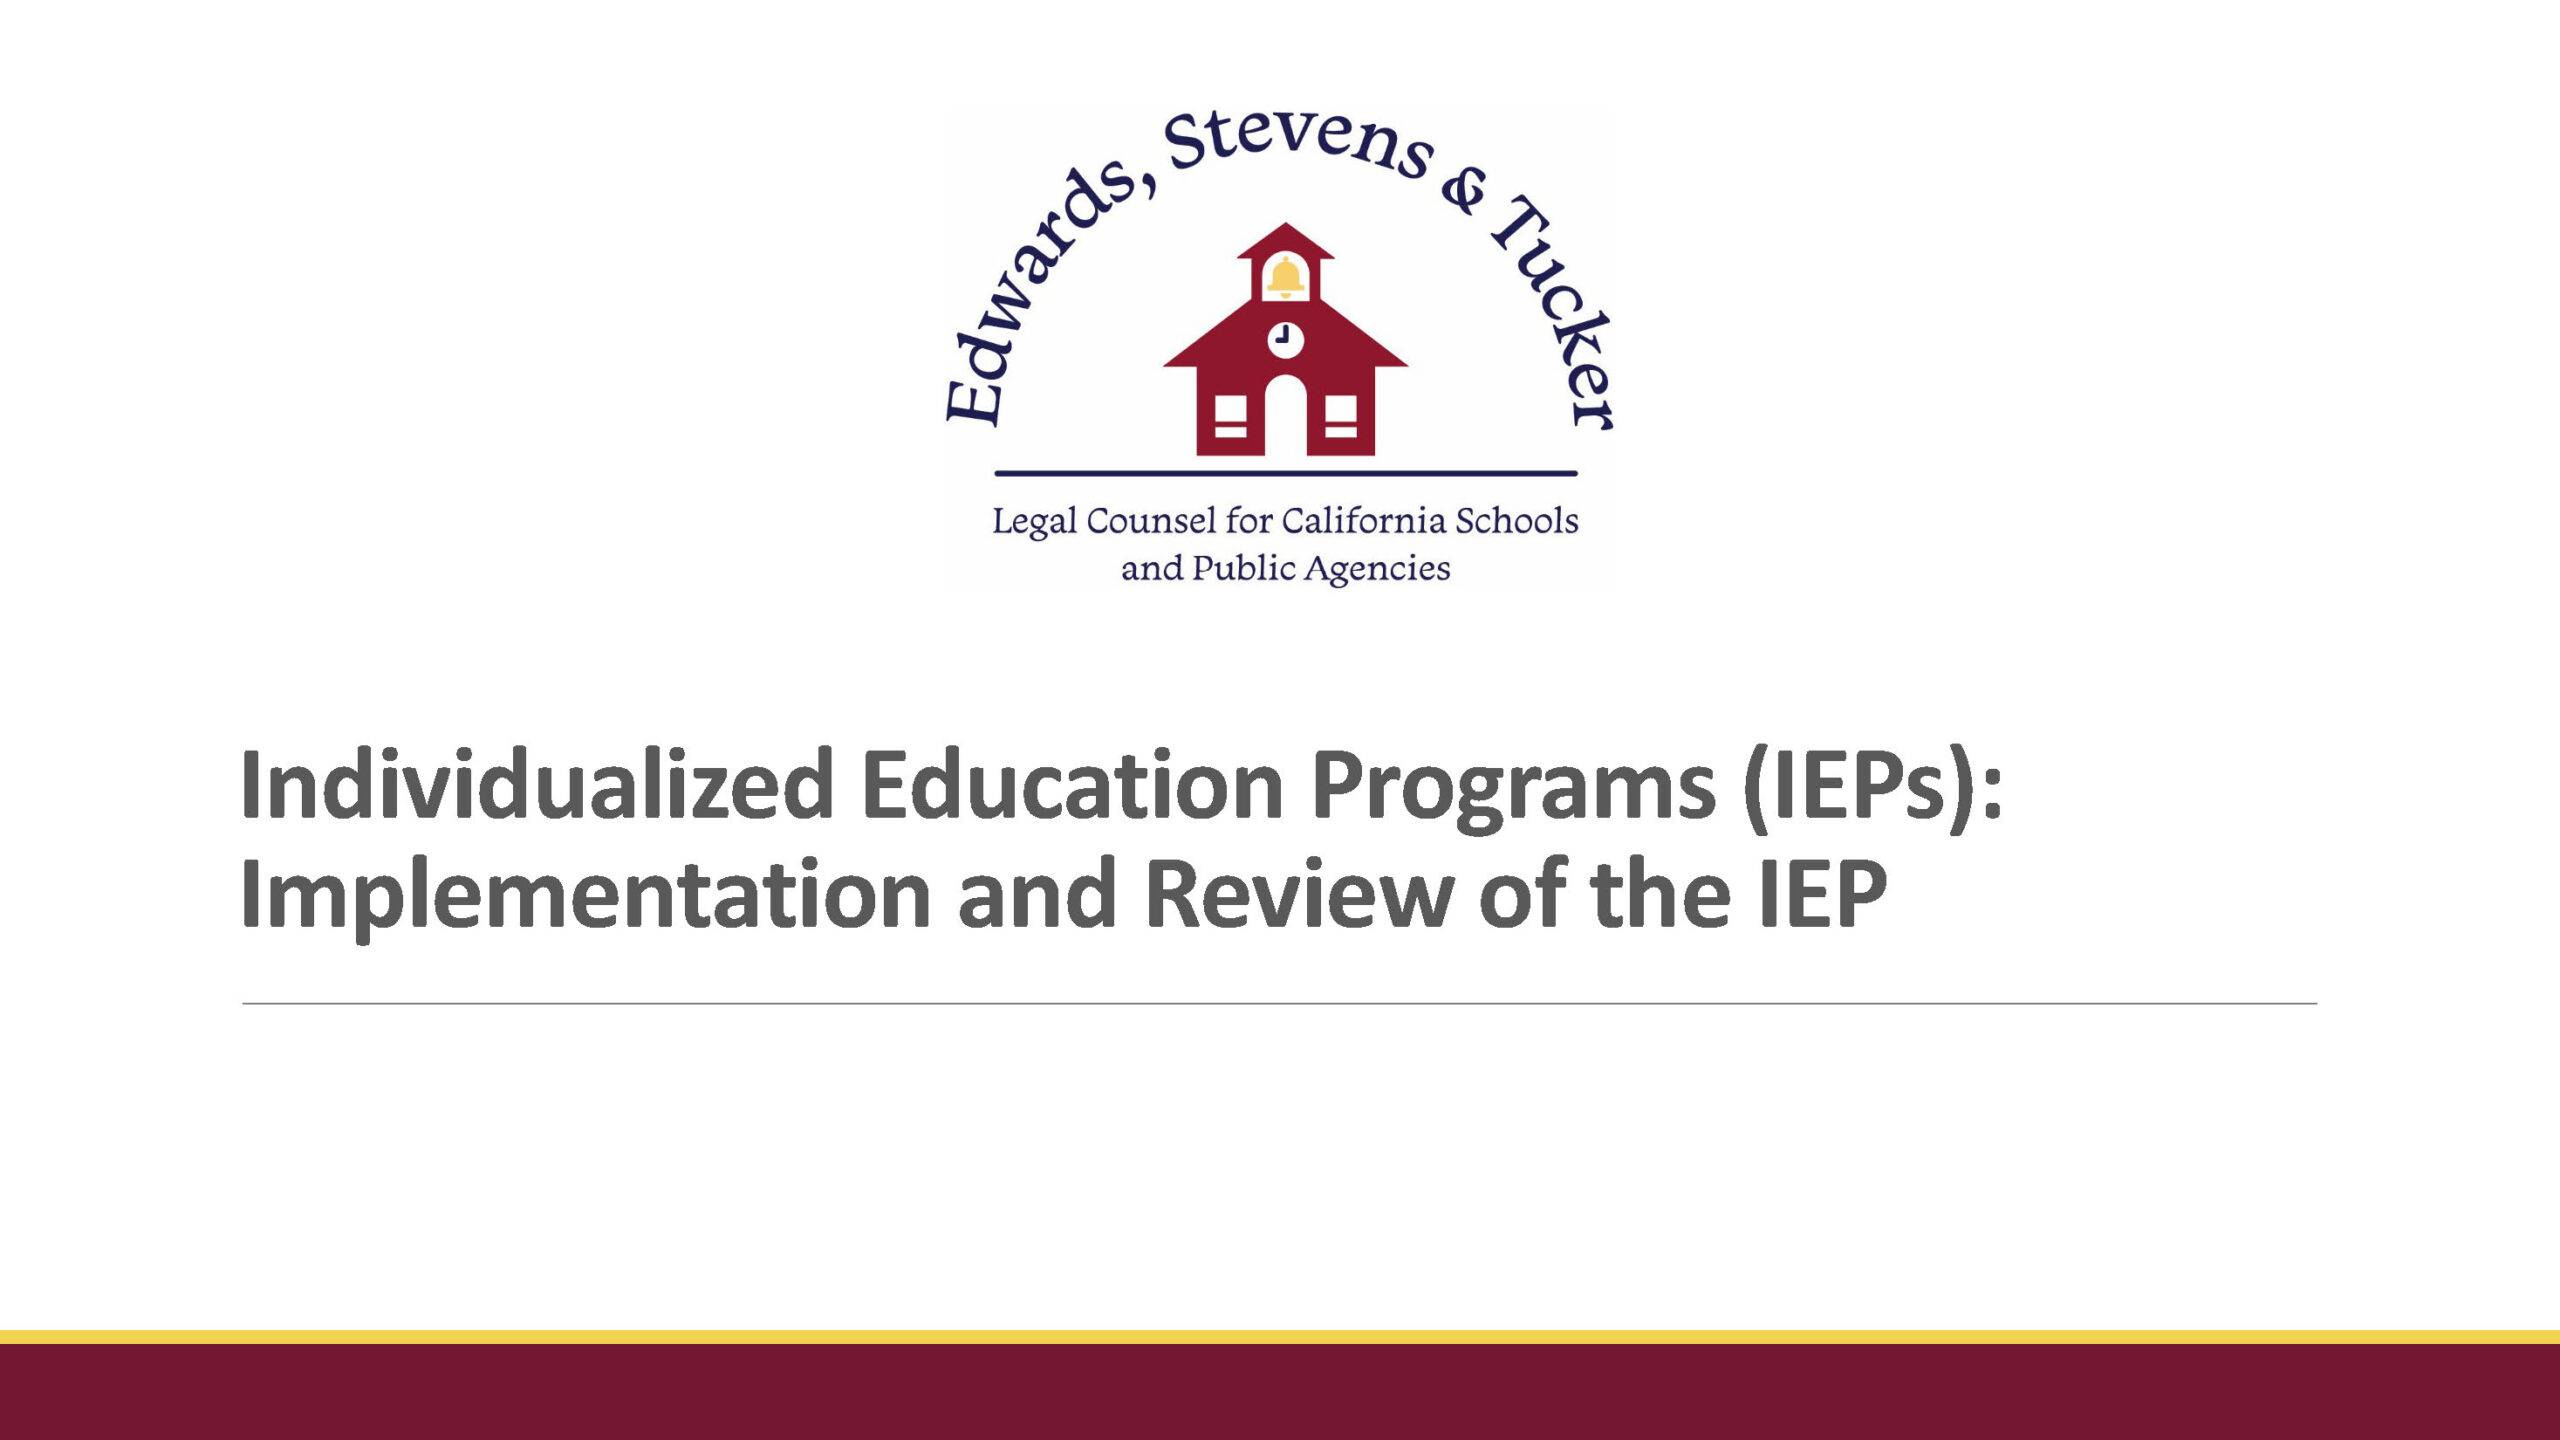 Implementation and Review of the IEP